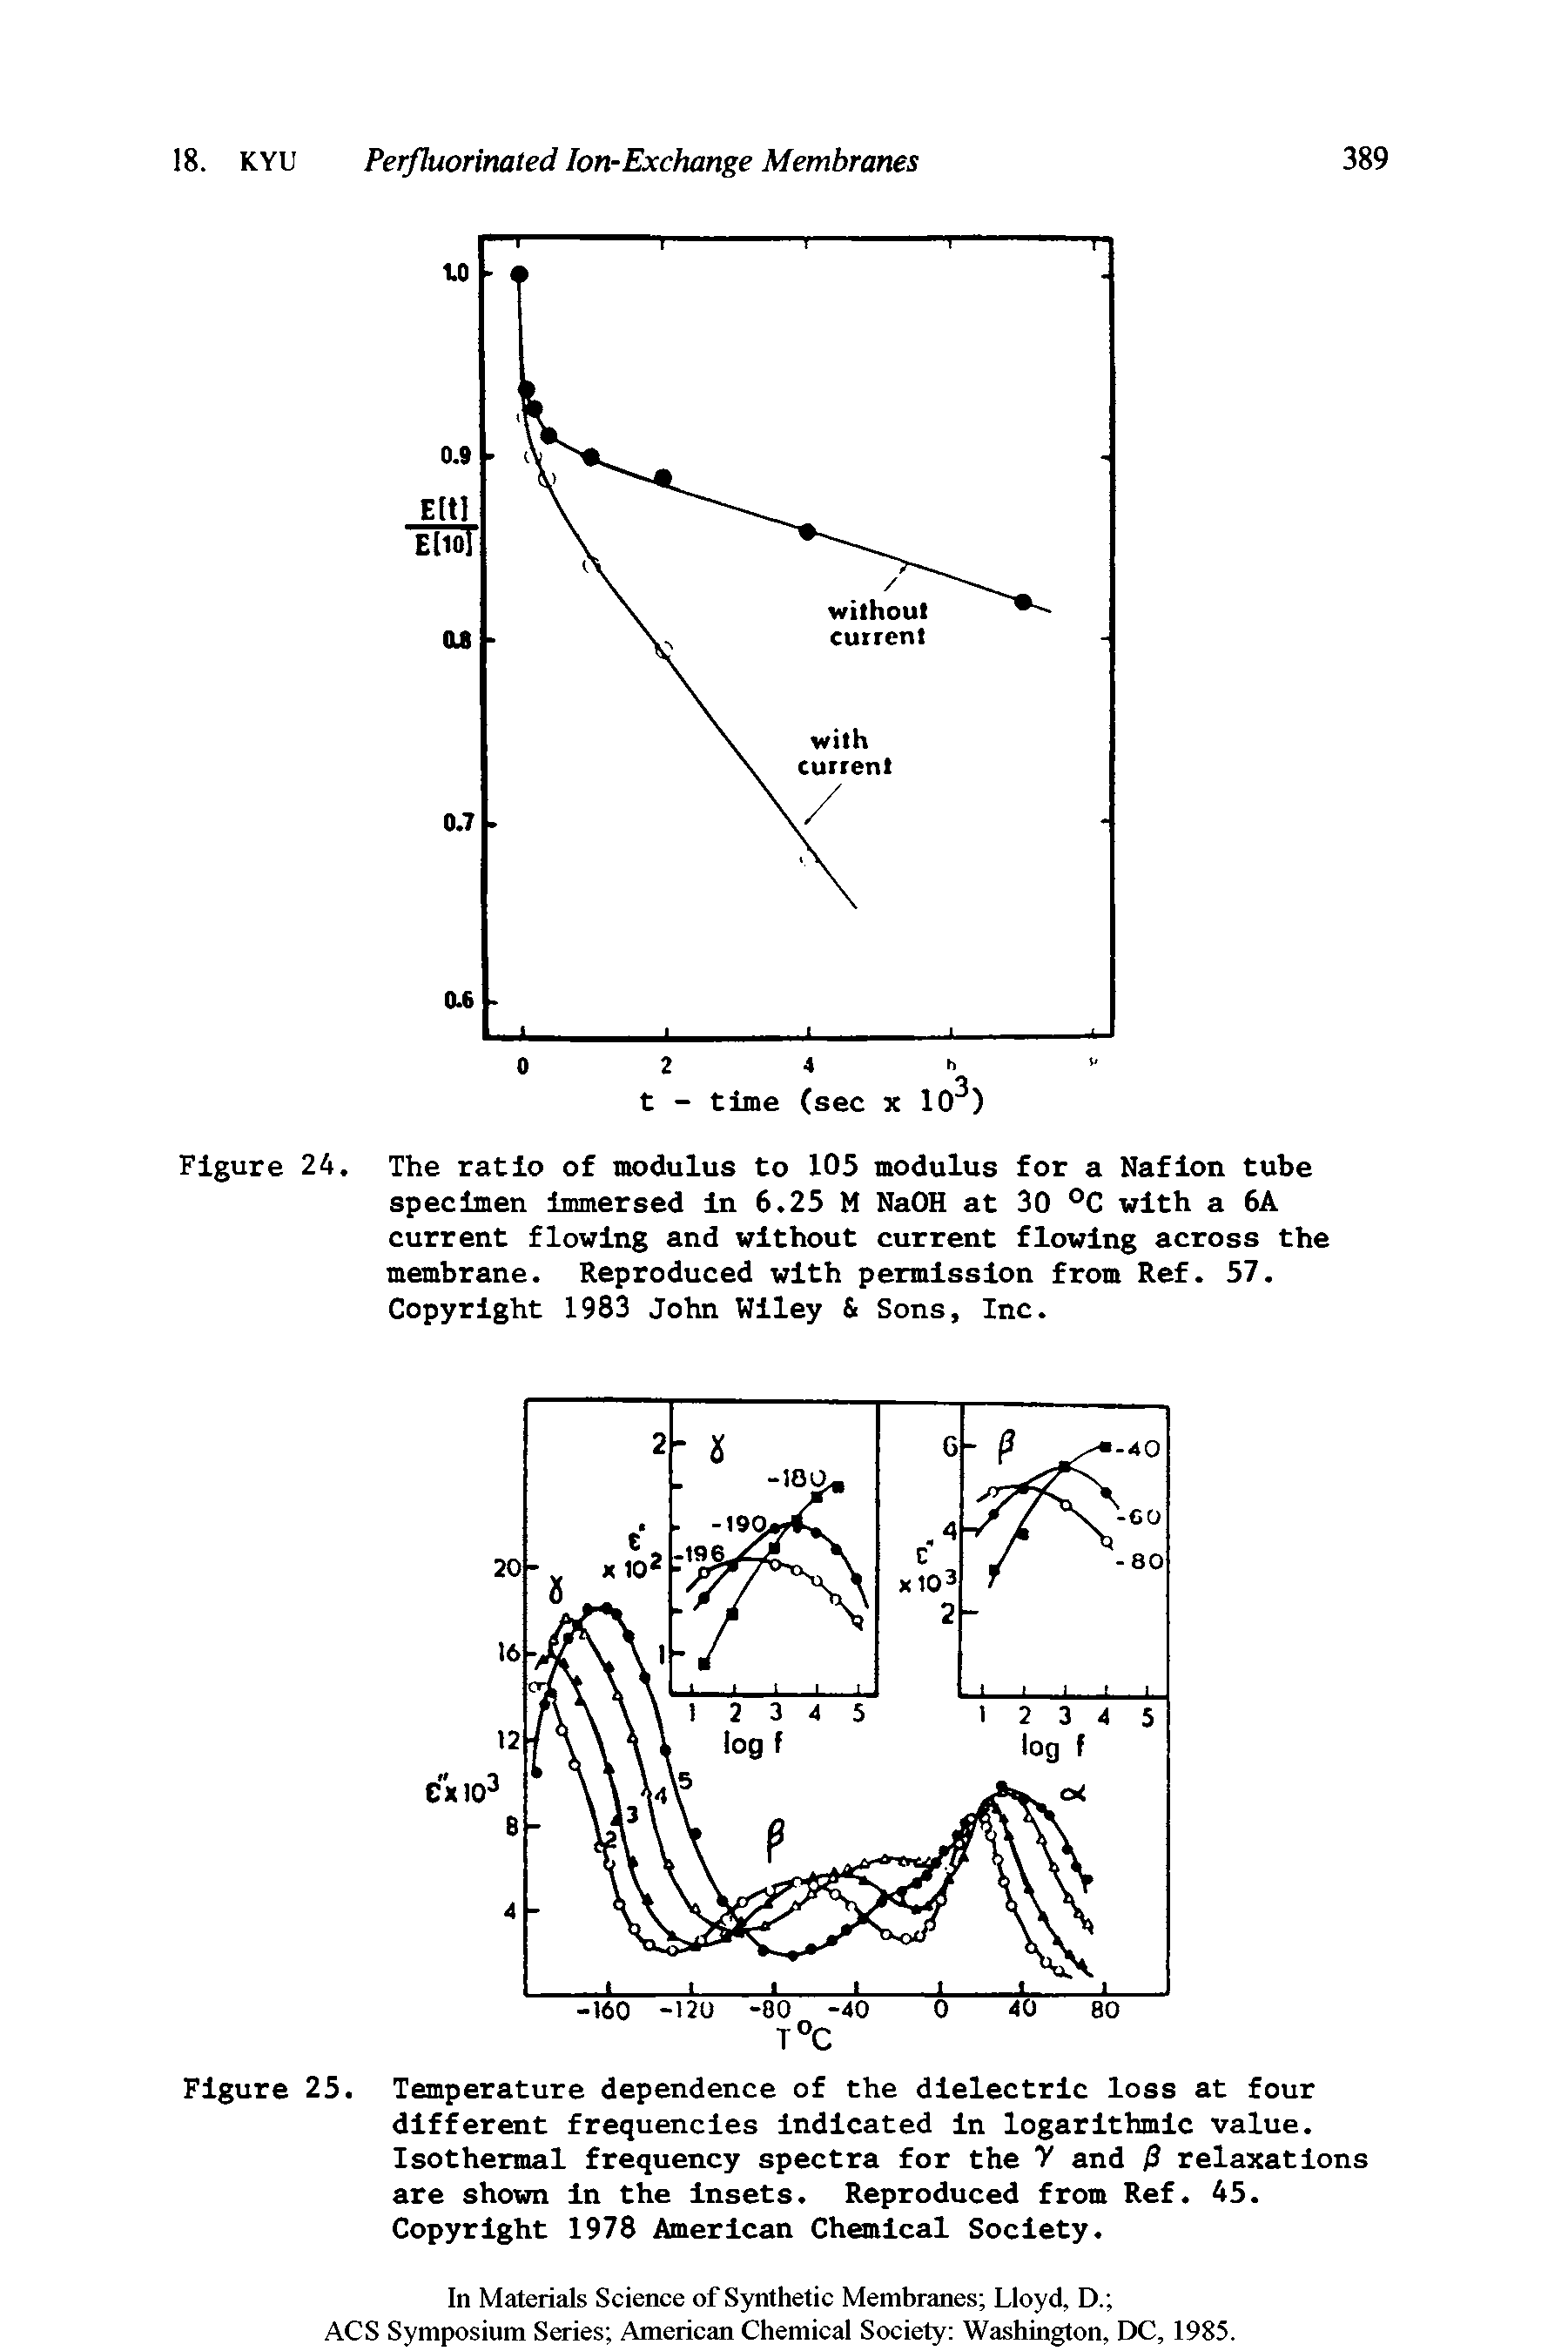 Figure 25. Temperature dependence of the dielectric loss at four different frequencies Indicated in logarithmic value. Isothermal frequency spectra for the Y and 0 relaxations are shown In the Insets. Reproduced from Ref. 45. Copyright 1978 American Chemical Society.